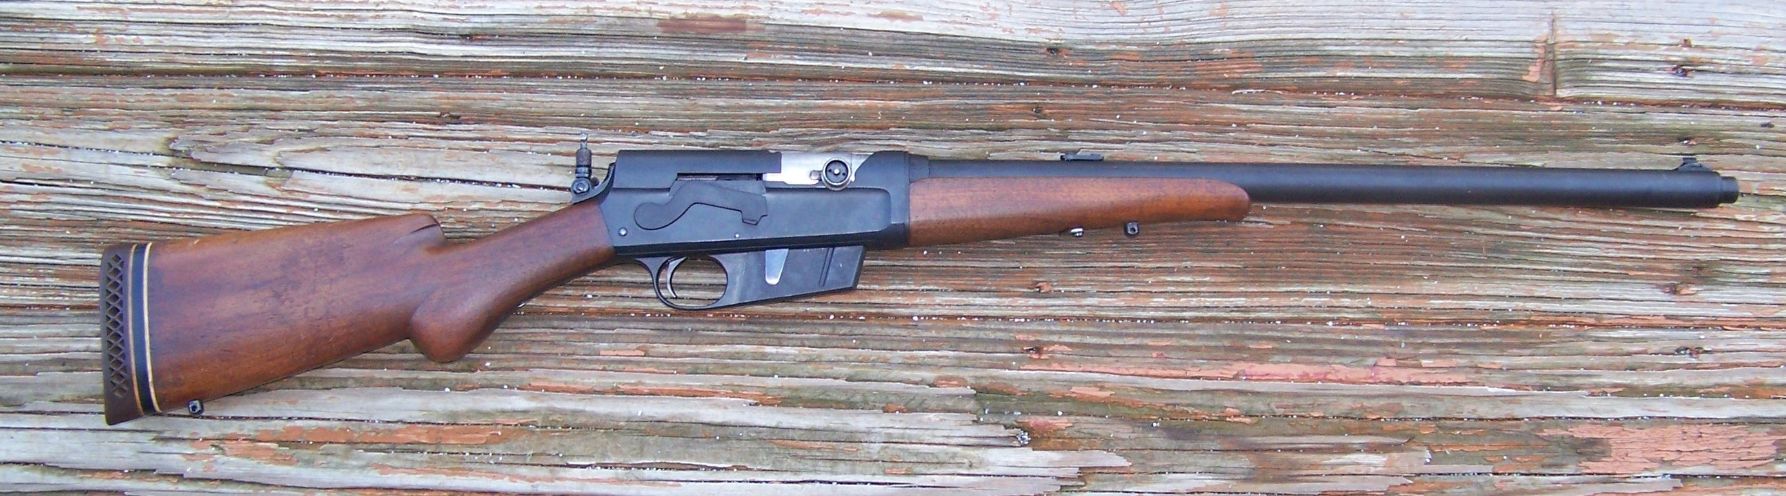 The Remington Model 8 is a rifle with many good features and a timeless quality.